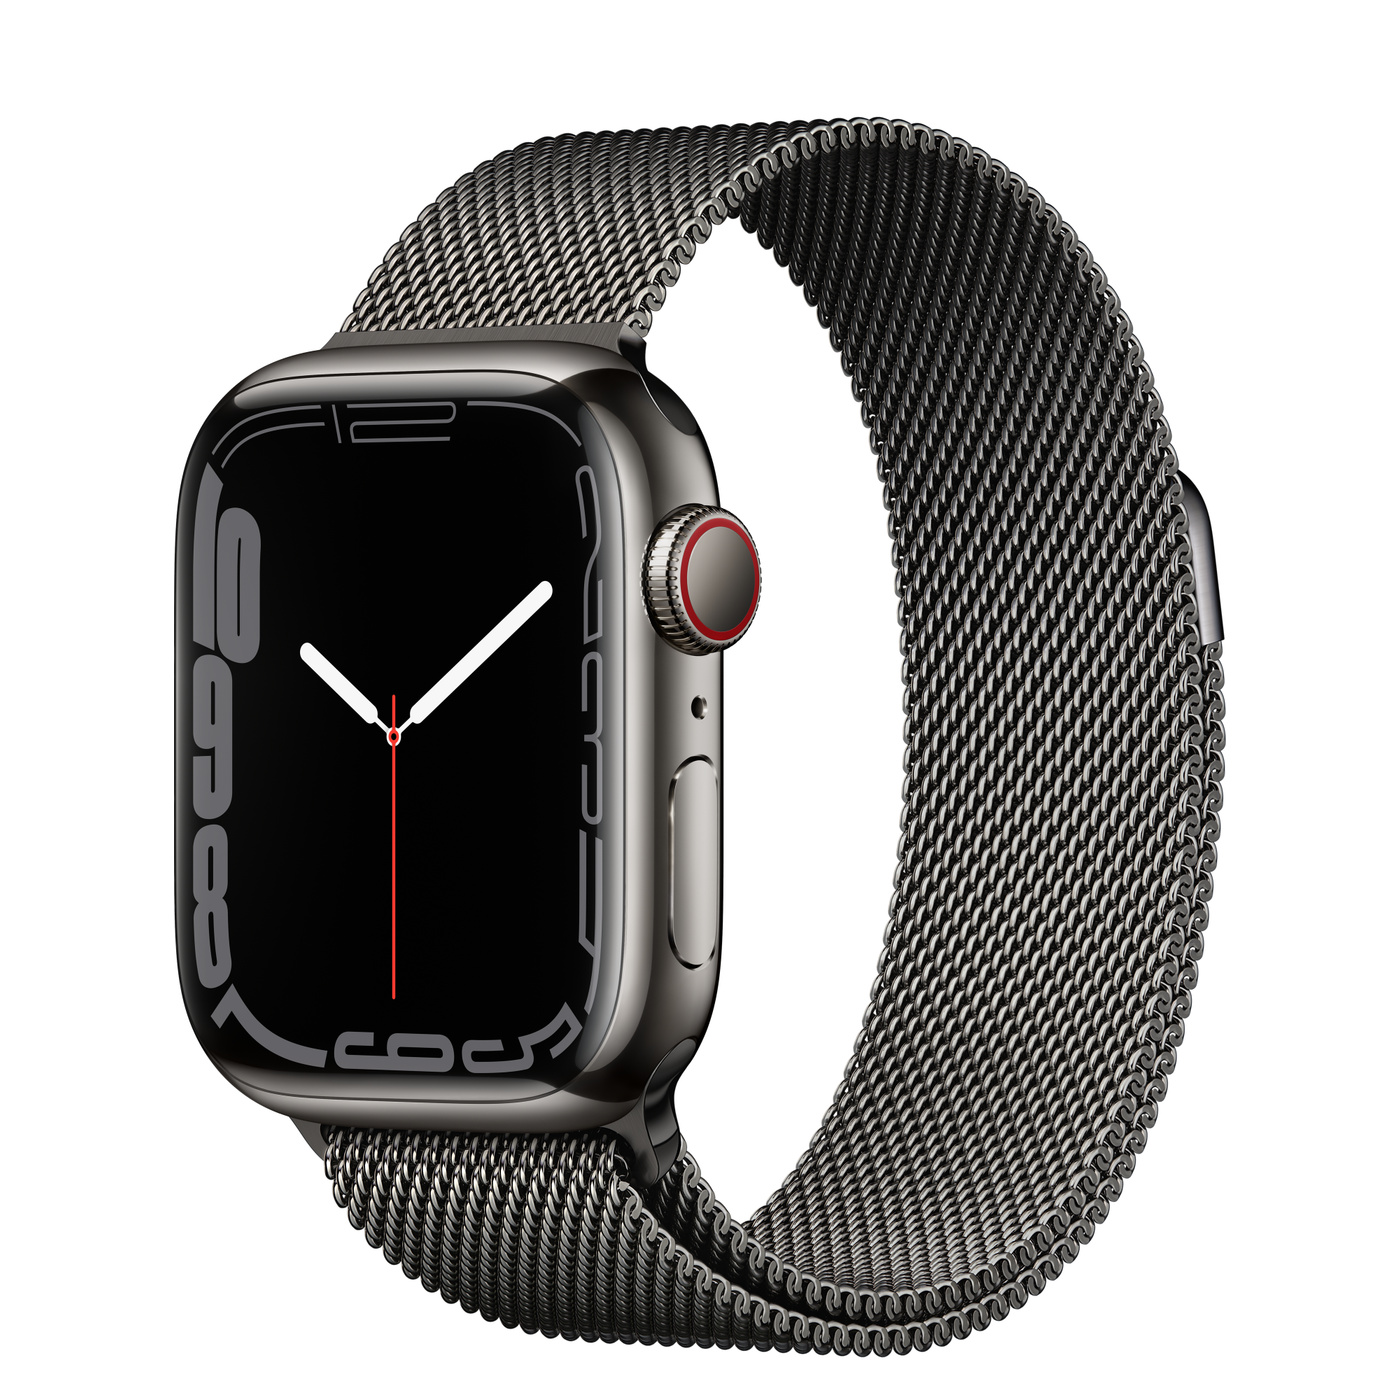 Apple Watch Series 7 41MM Graphite Stainless Steel Case with Milanese Loop